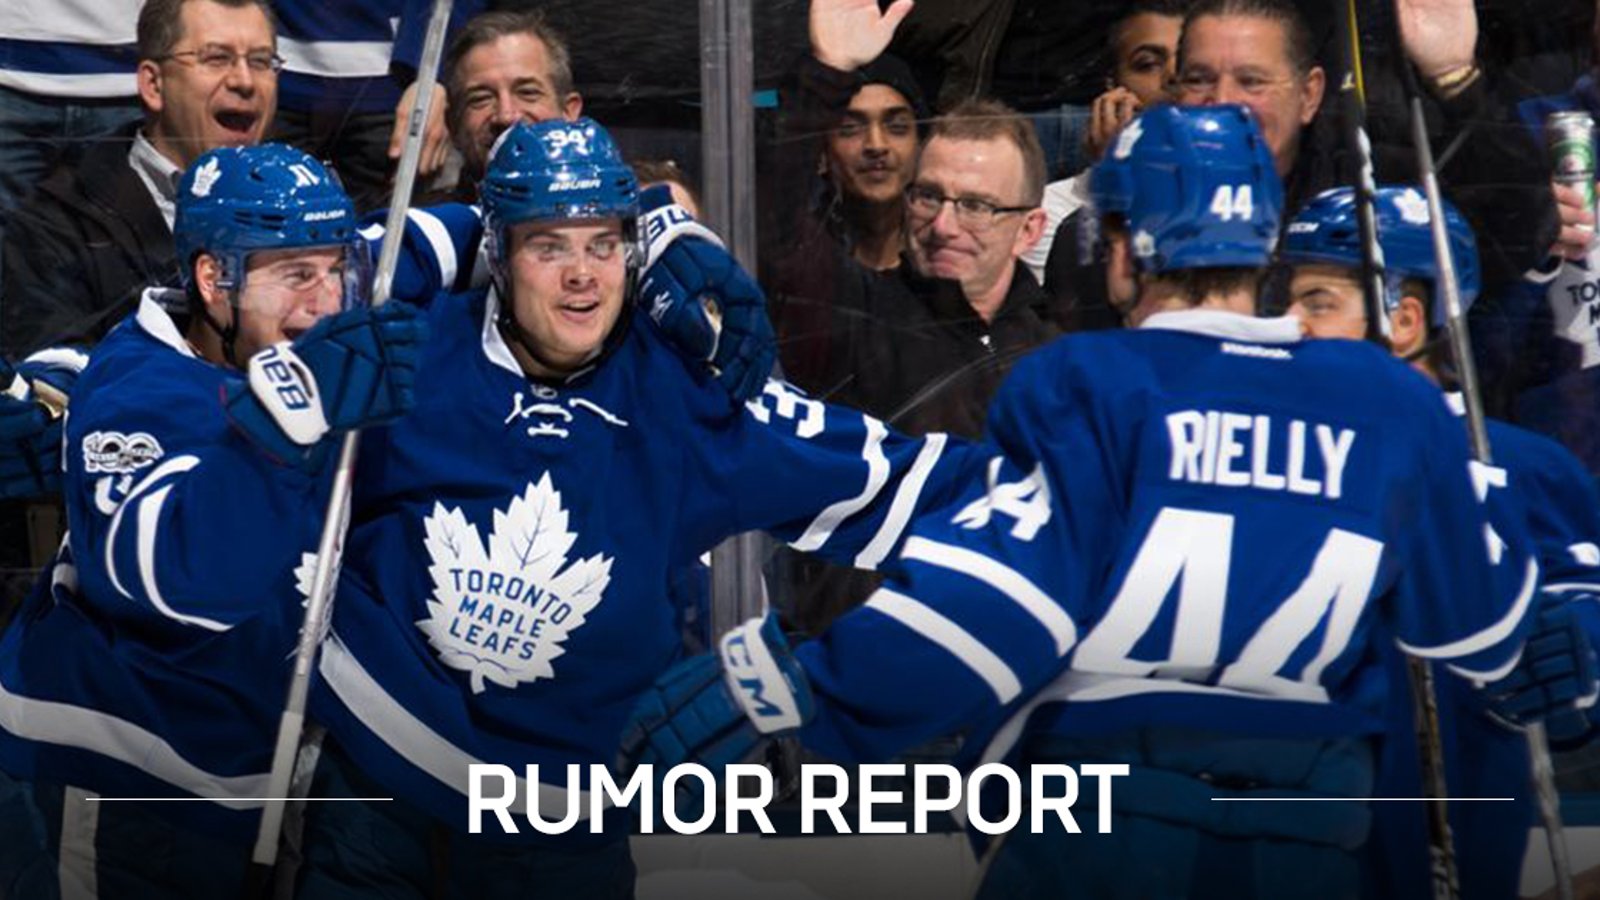 Rumor: Veteran Leafs player likely to be traded